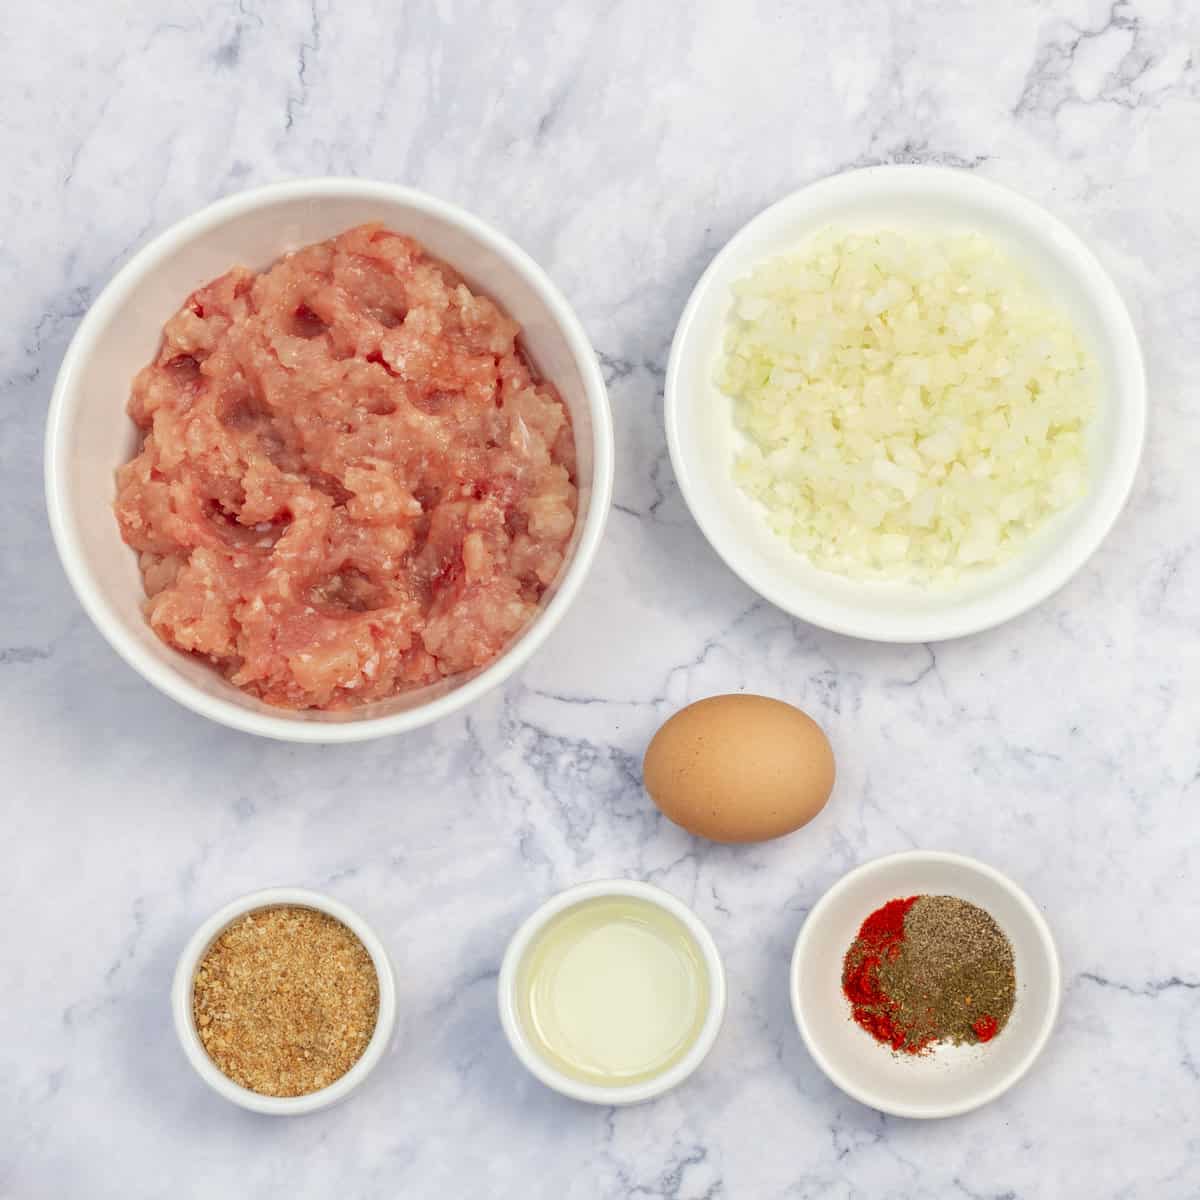 Ingredients of raw ground chicken breast, diced onion, spices, and an egg in separate dishes.